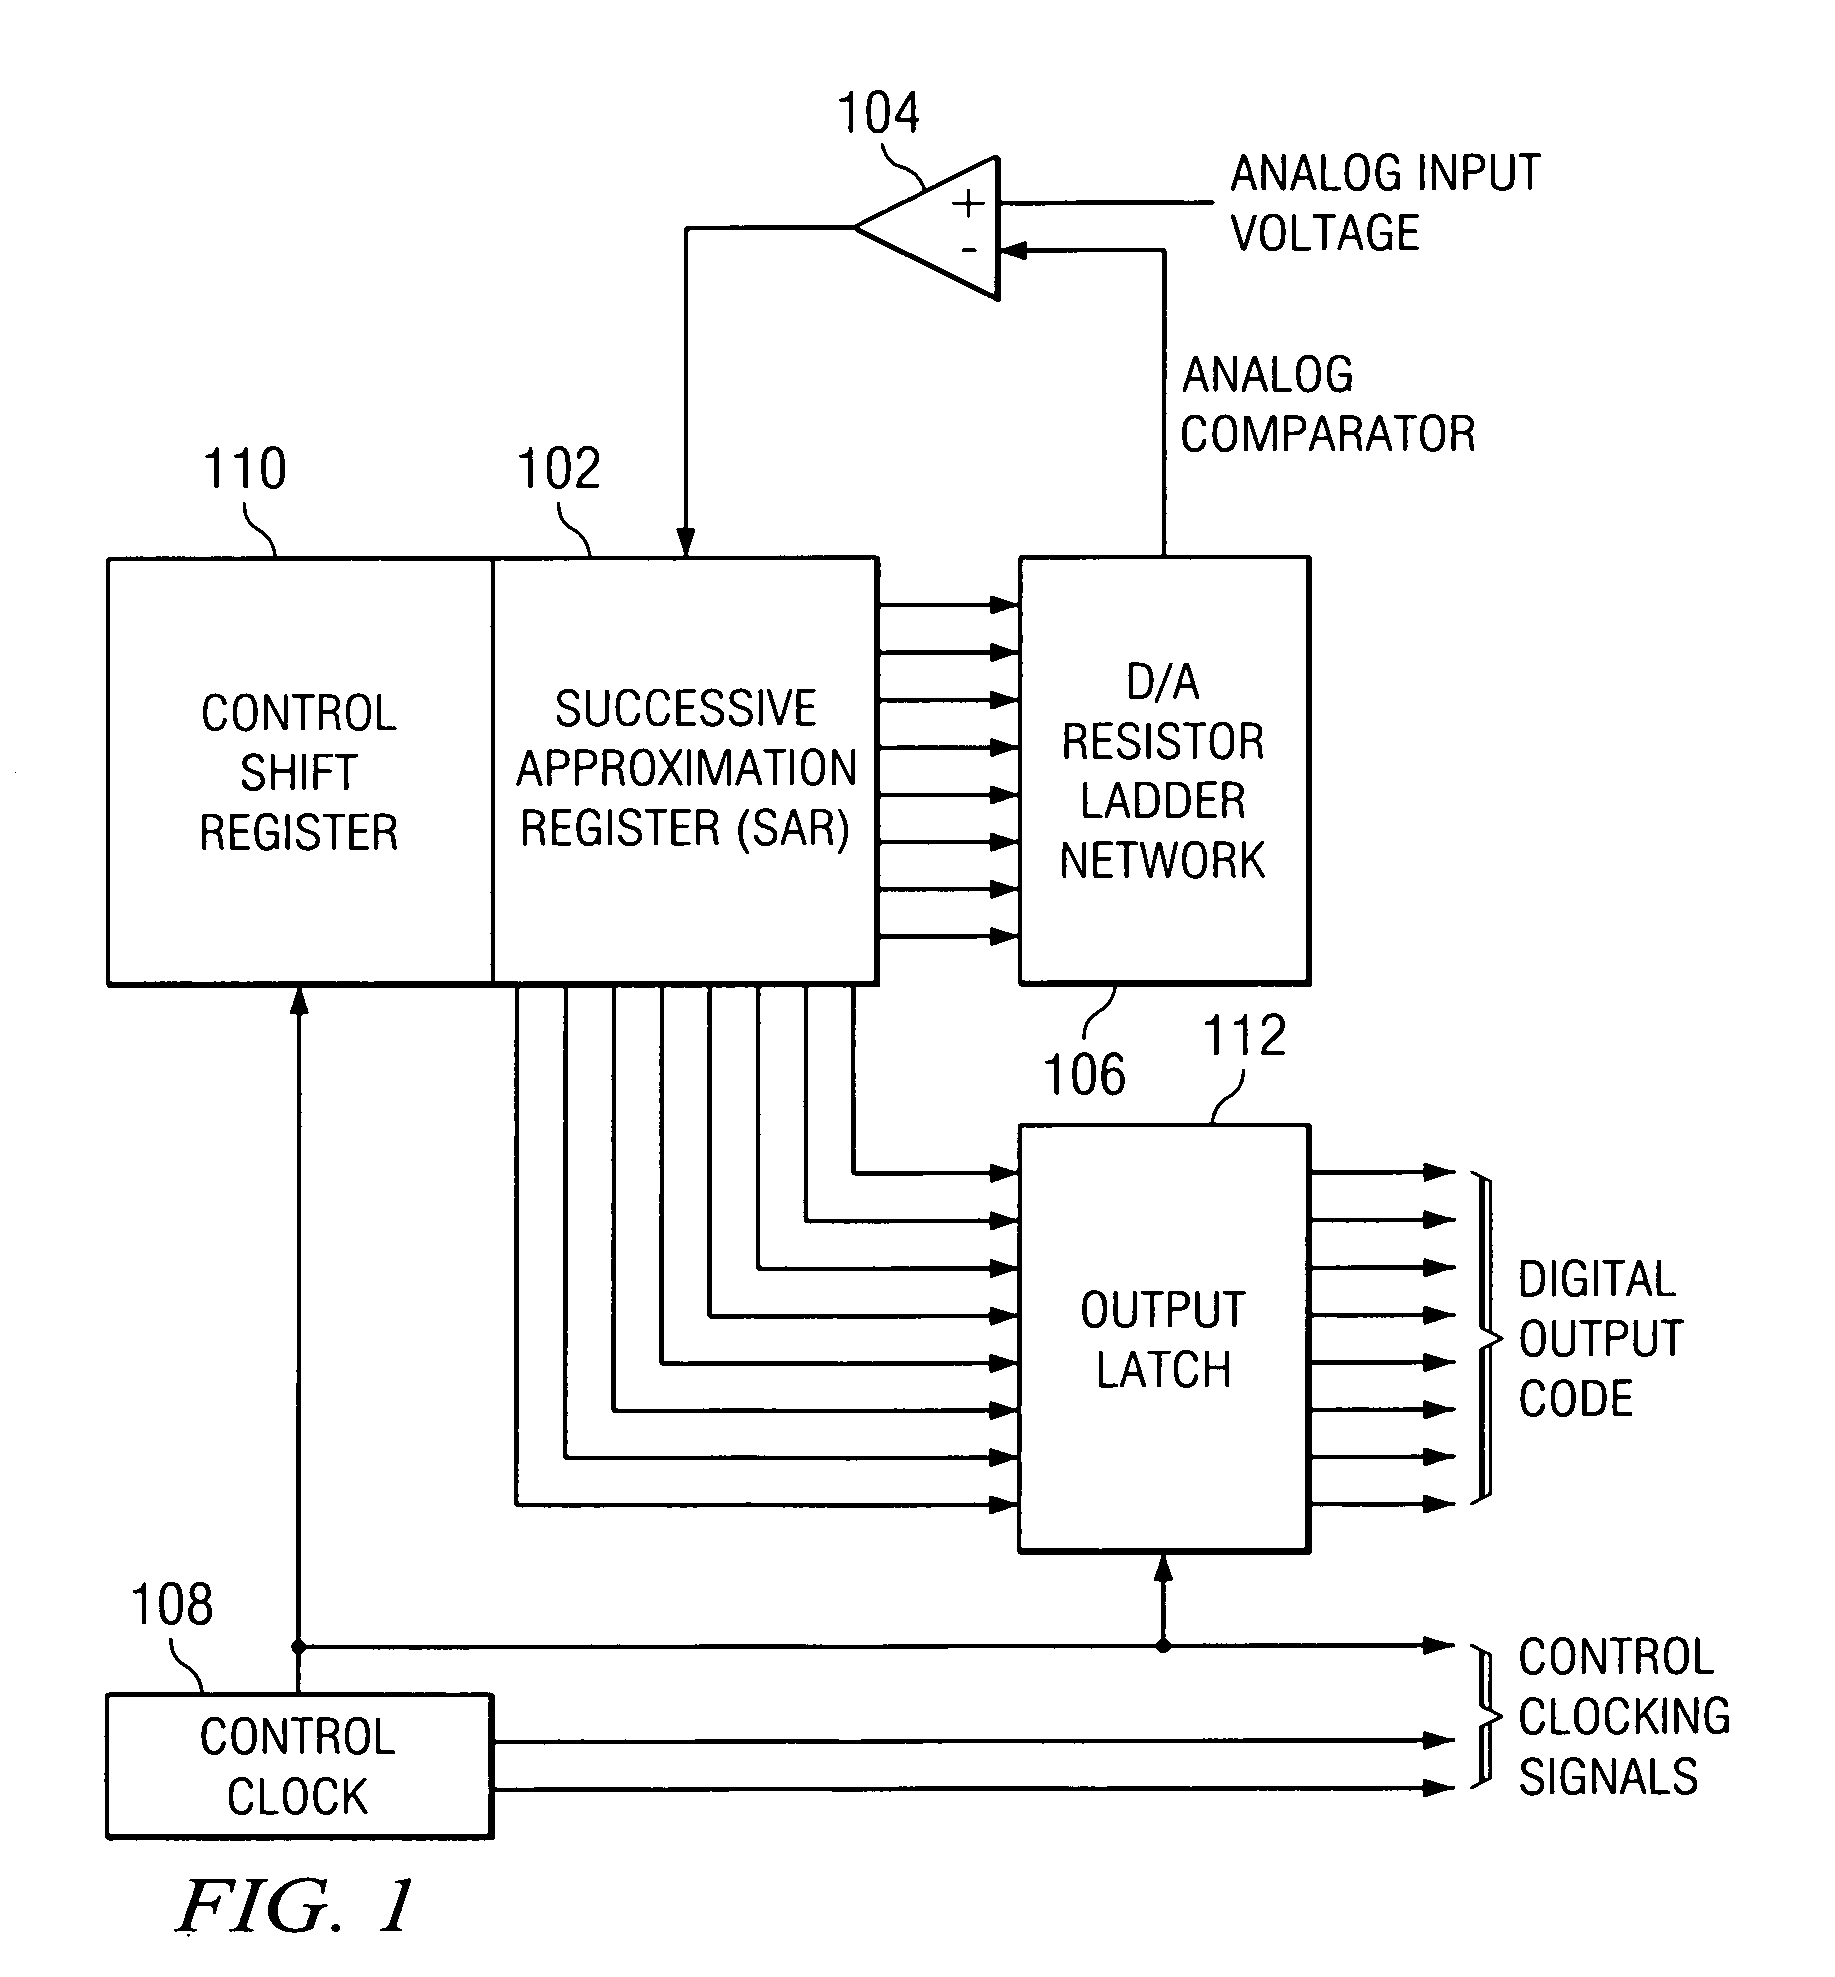 Method for search and matching of capacitors for a digital to analog converter of an SAR analog to digital converter